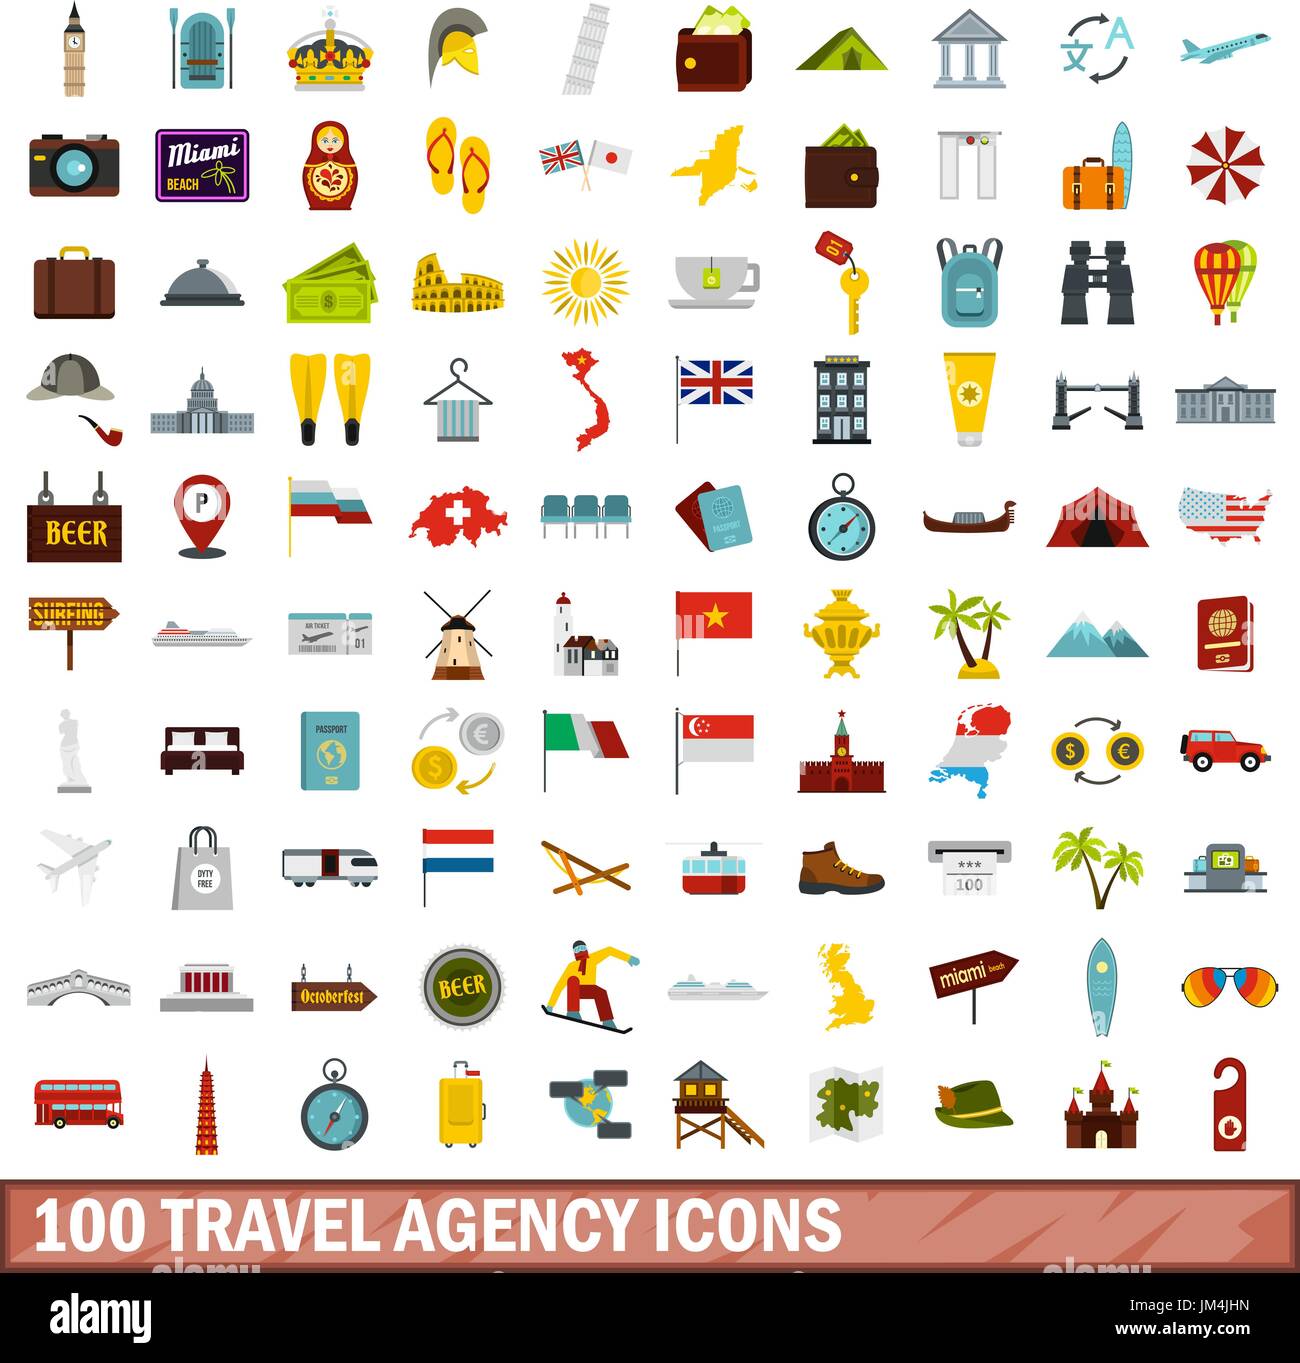 100 travel agency icons set, flat style Stock Vector